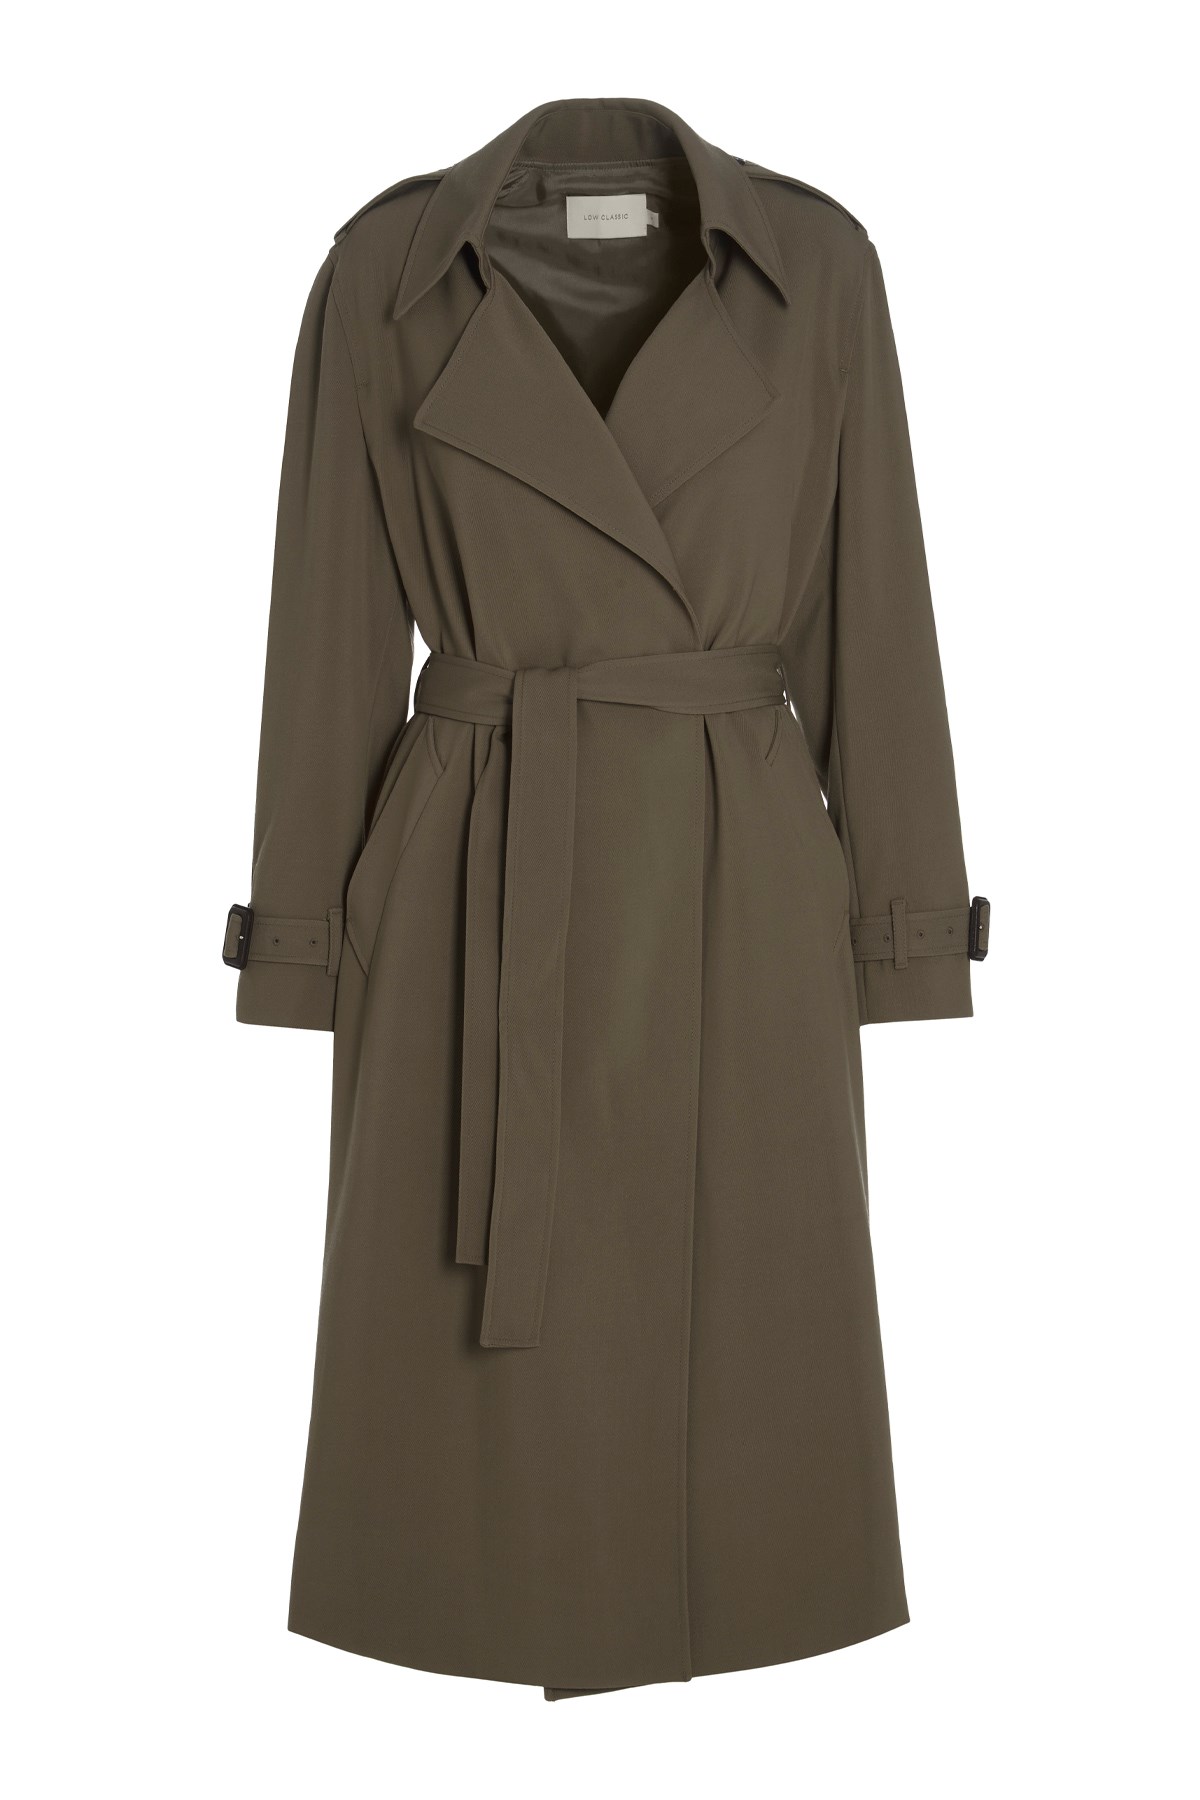 LOW CLASSIC Belted Trench Coat